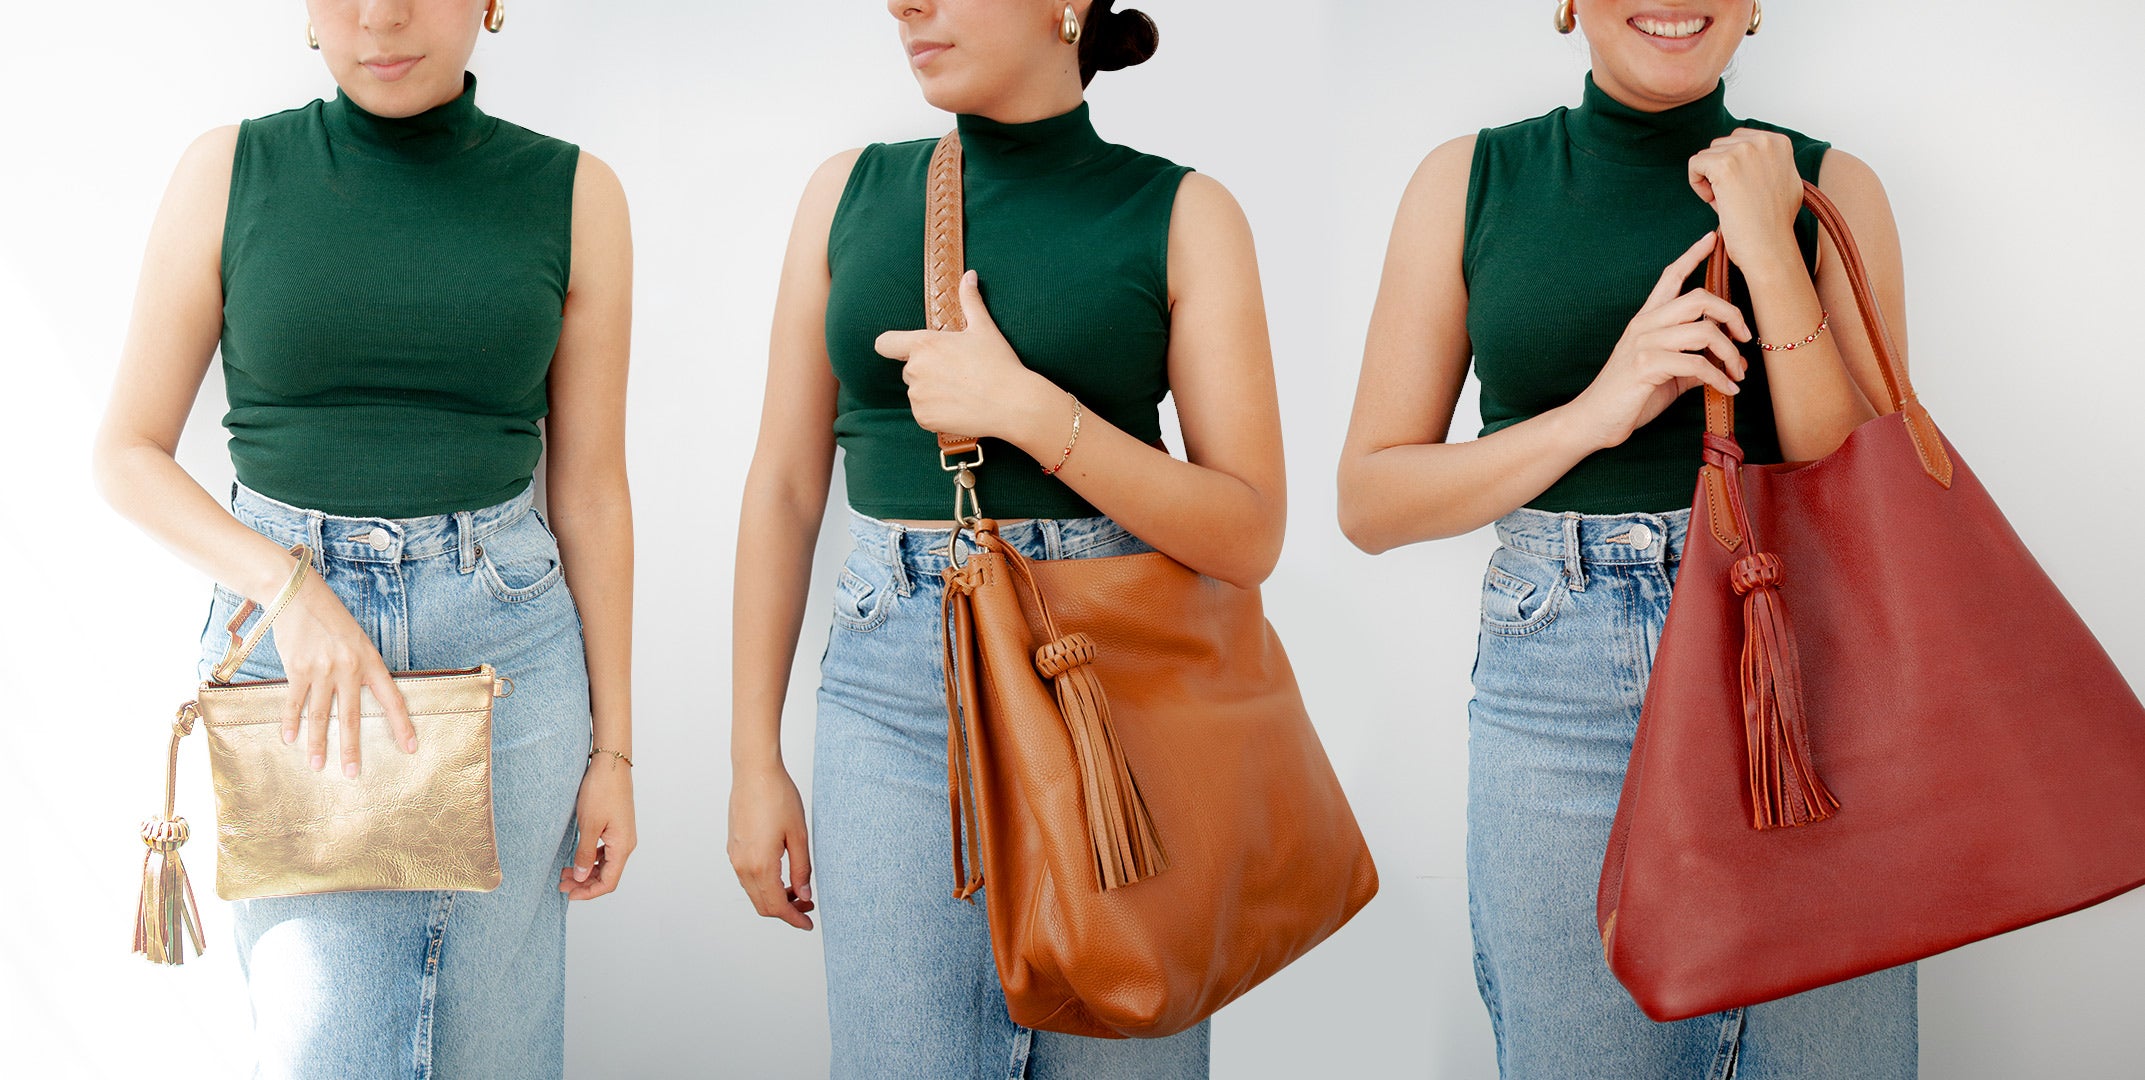 Summer Capsule Wardrobe: The Perfect Bag for a Chic Loose Kimono & a Denim Skirt